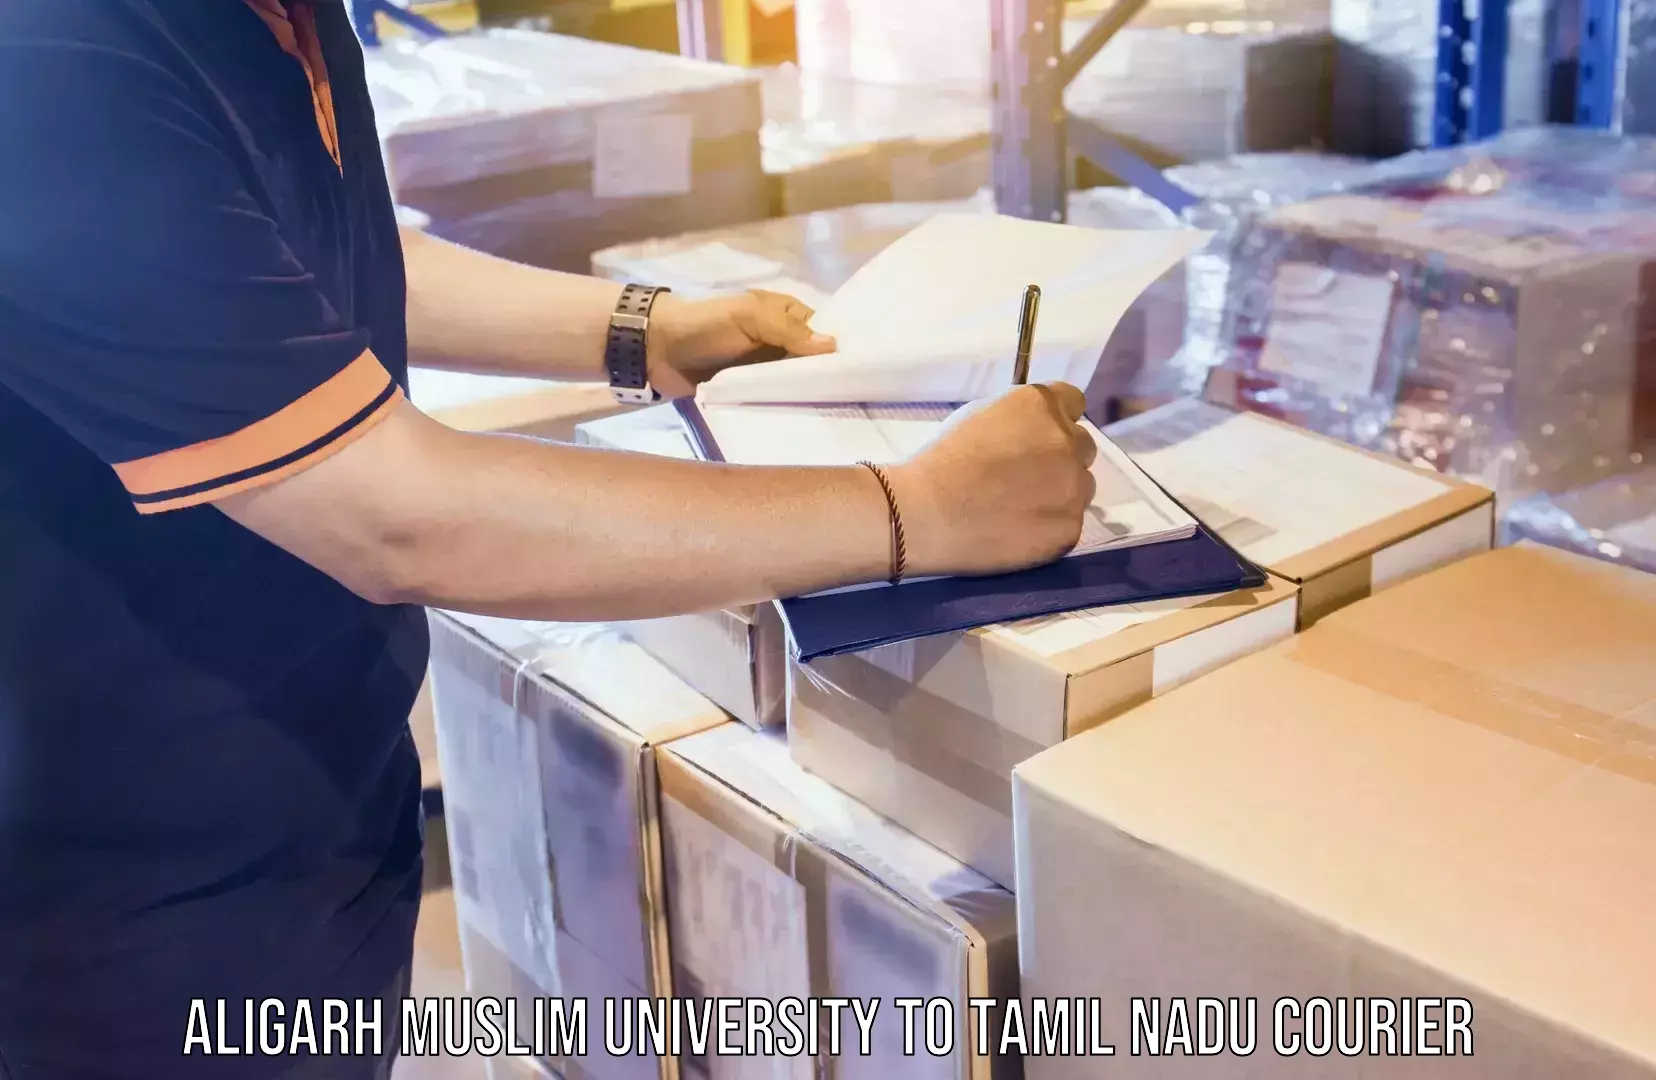 On-time delivery services Aligarh Muslim University to Tamil Nadu